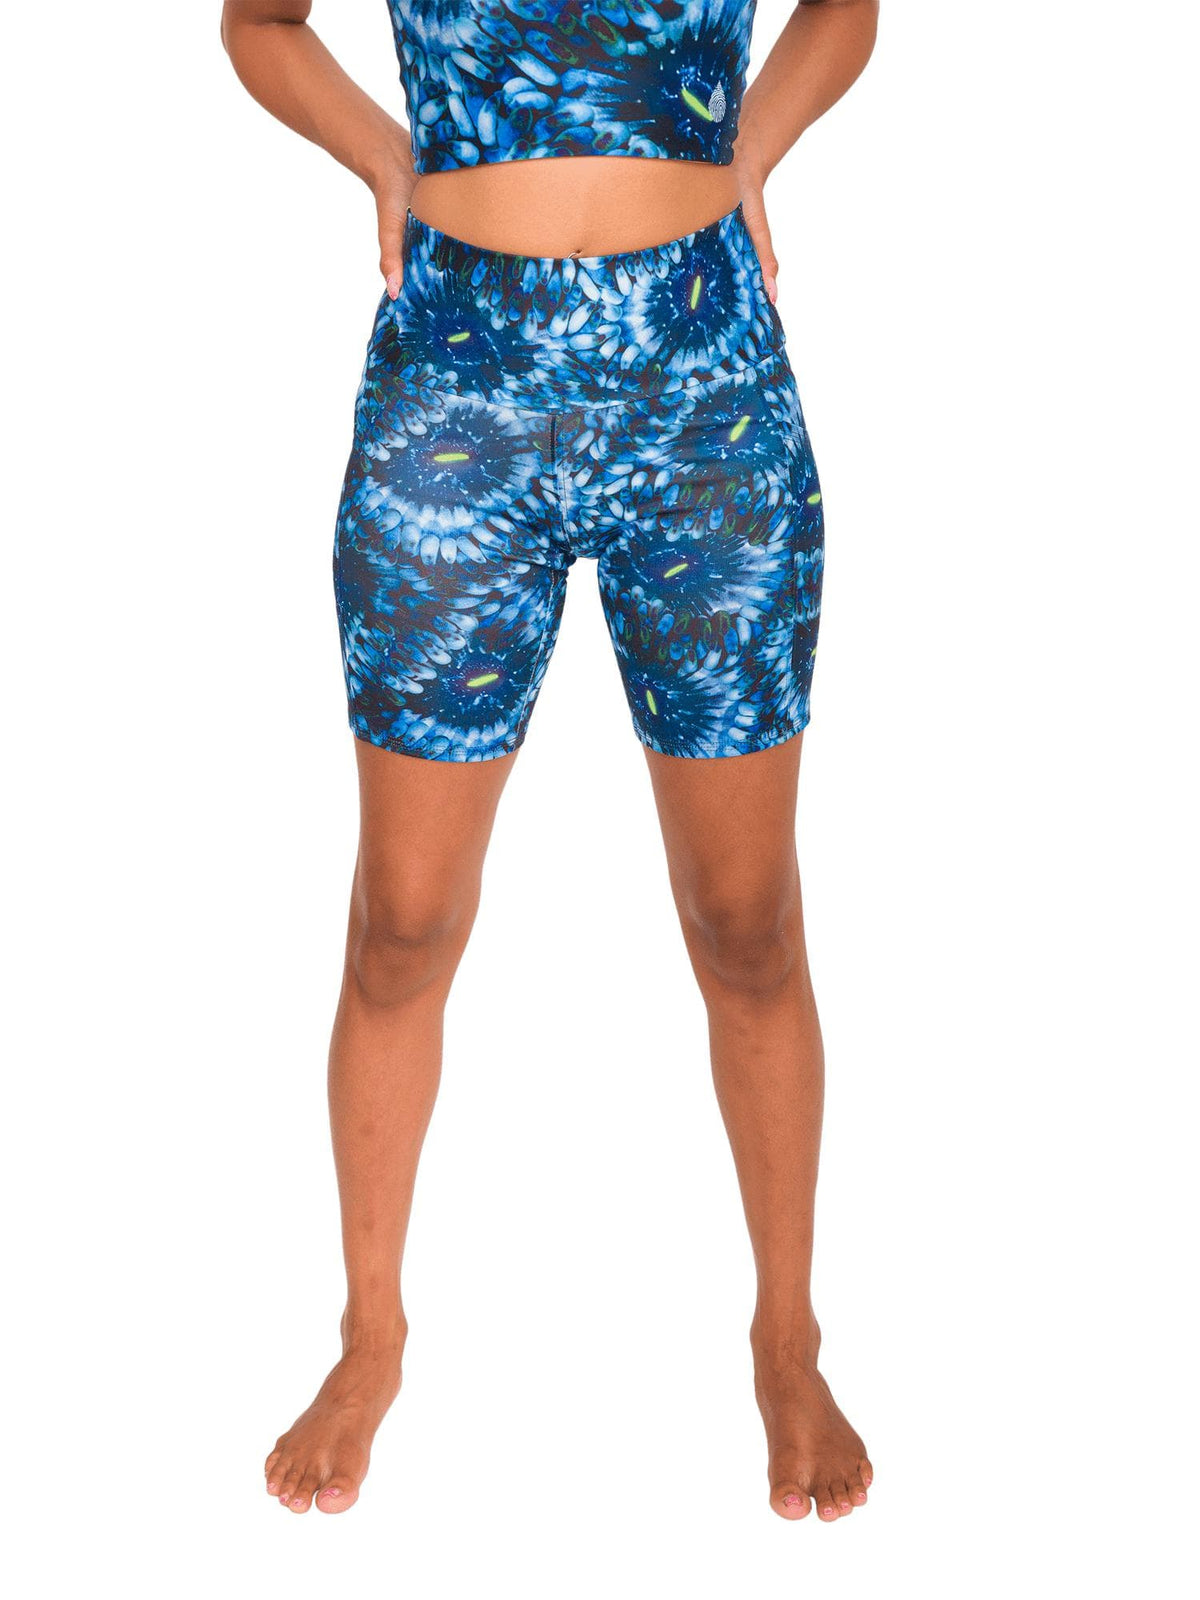 Model: Syriah is a sea turtle conservation biologist. She is 5&#39;7&quot;, 130lbs and is wearing a size S shorts and S top.